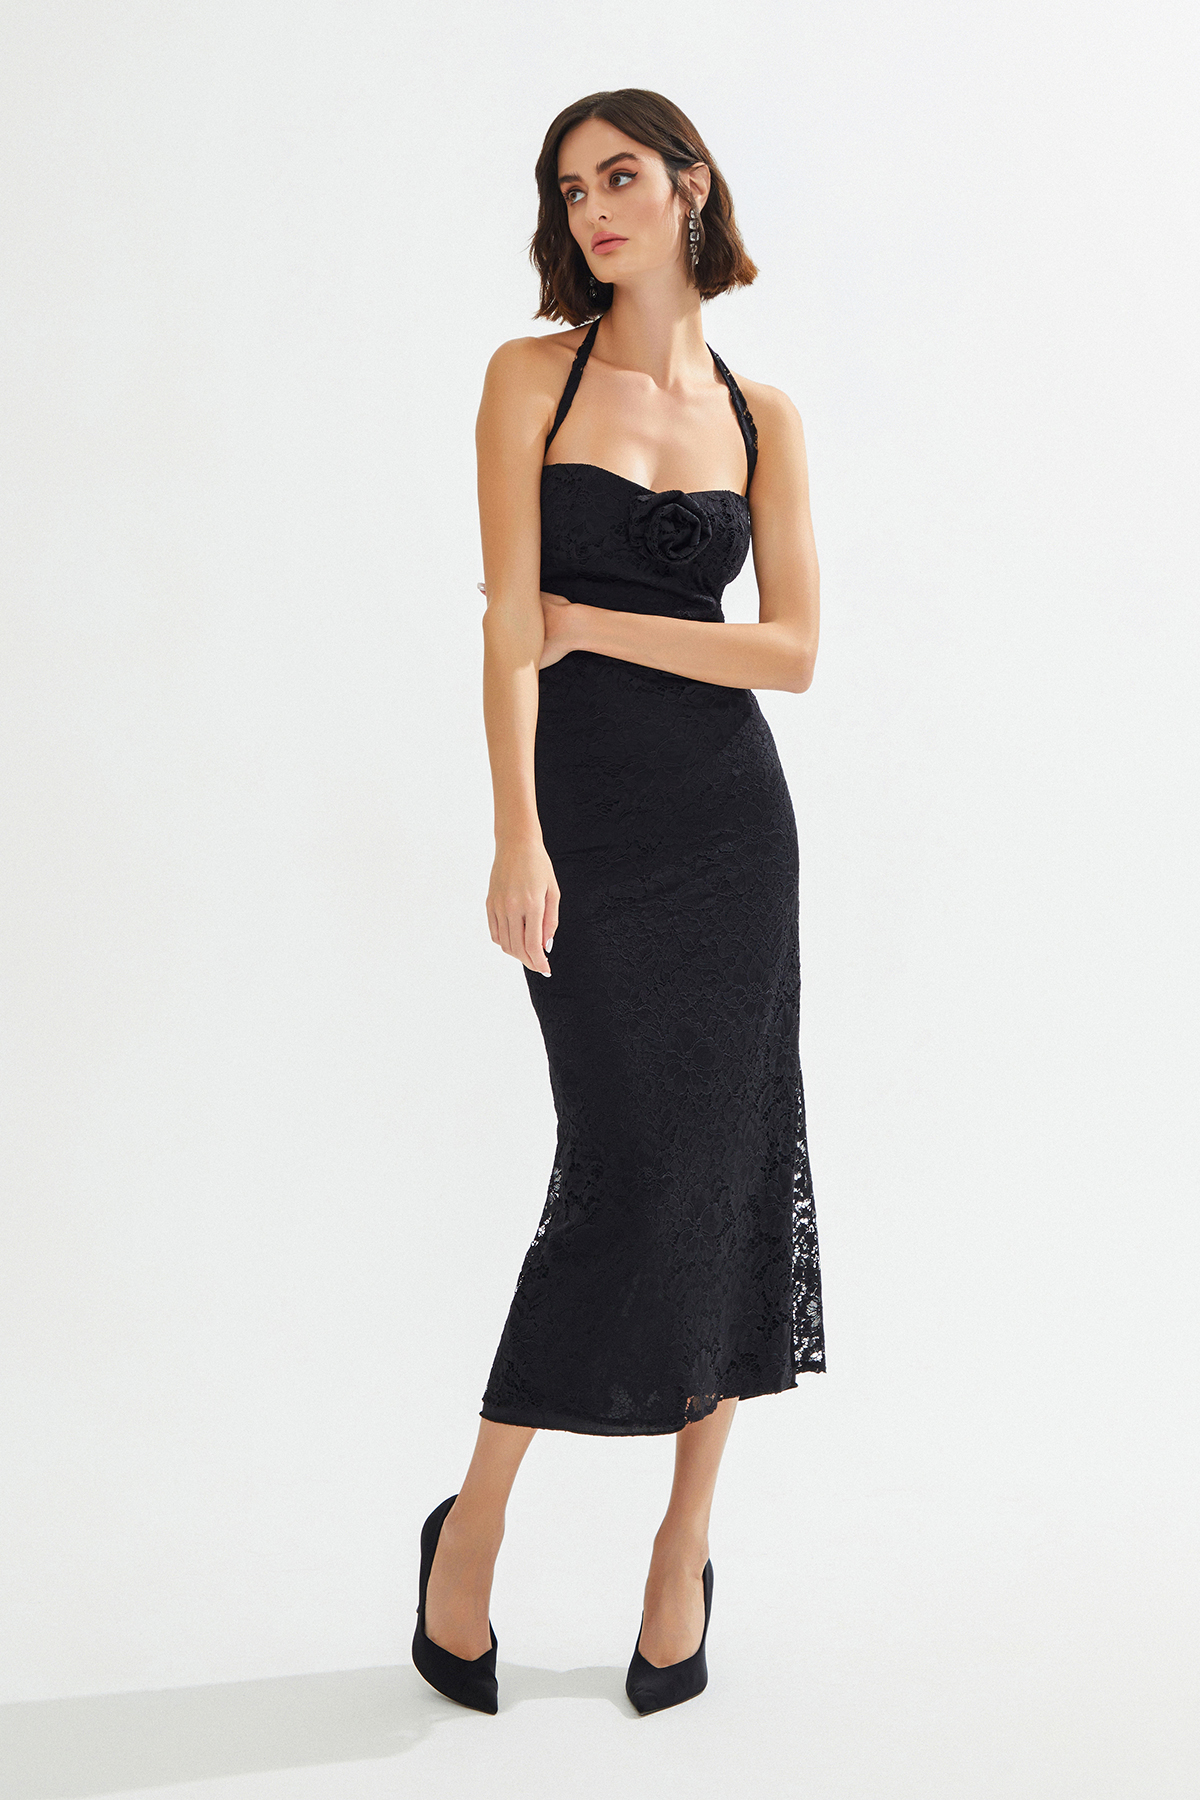 ANDY Floral Detailed Lace Midi Black Dress